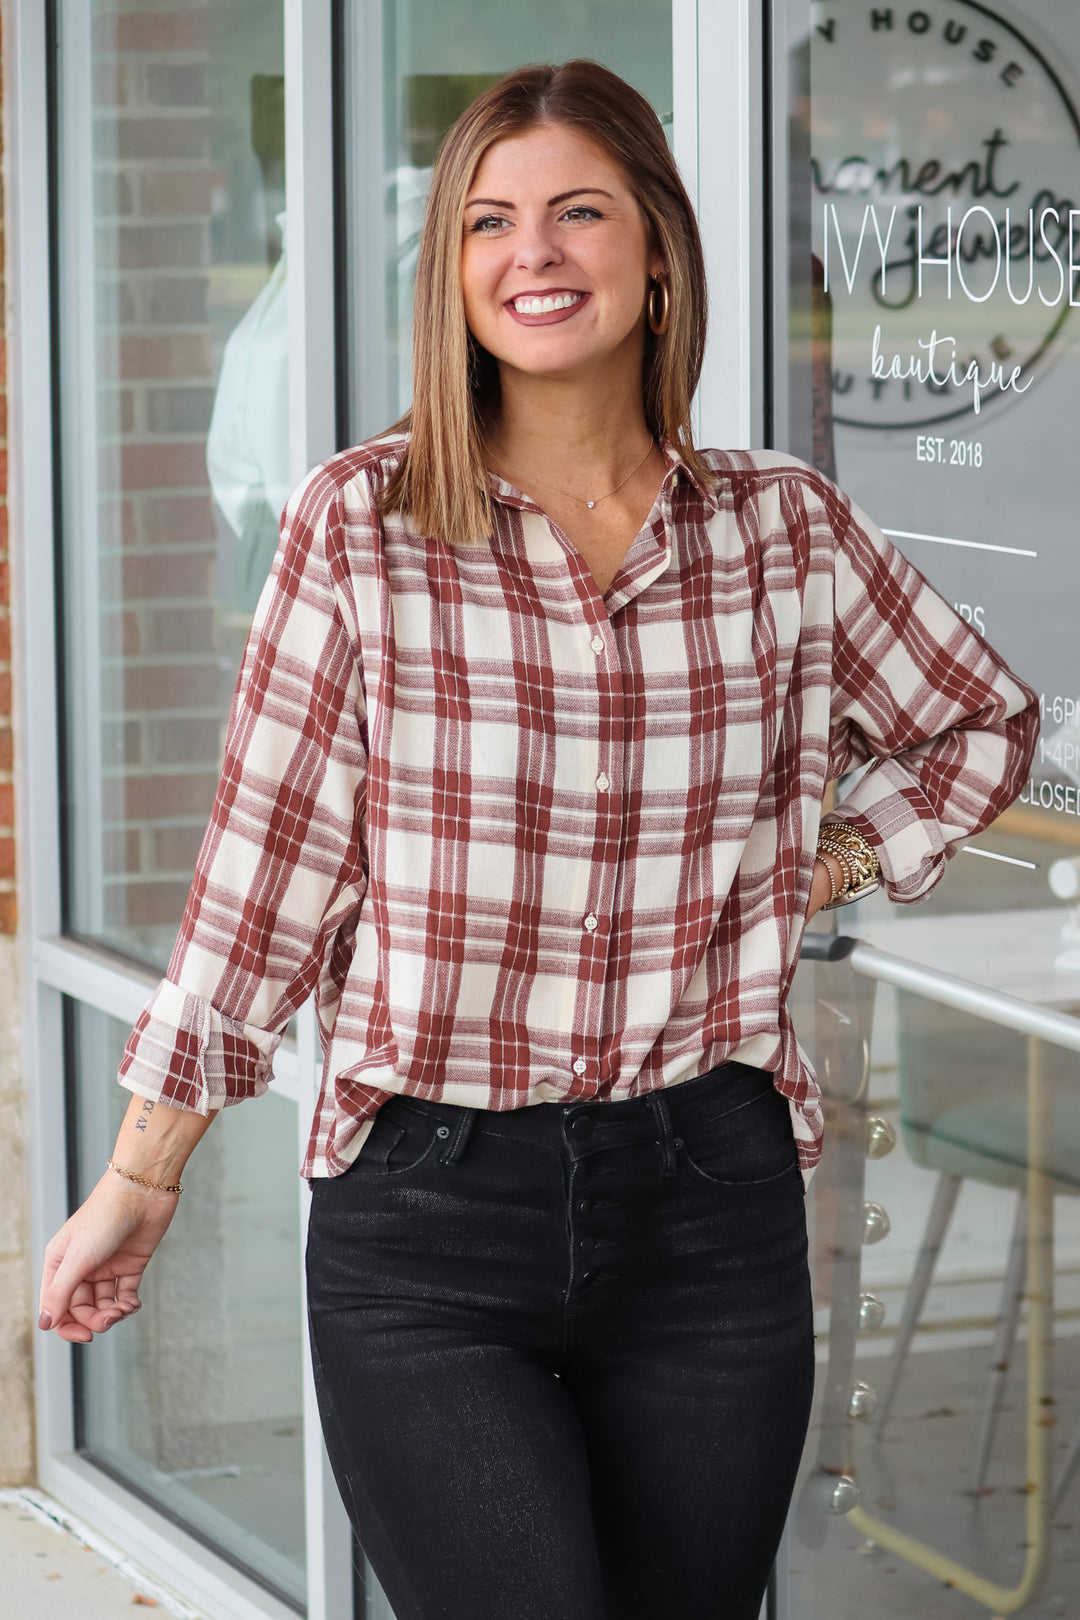 A brunette woman wearing a brown and cream colored plaid button down top. She is standing in front of a shop.